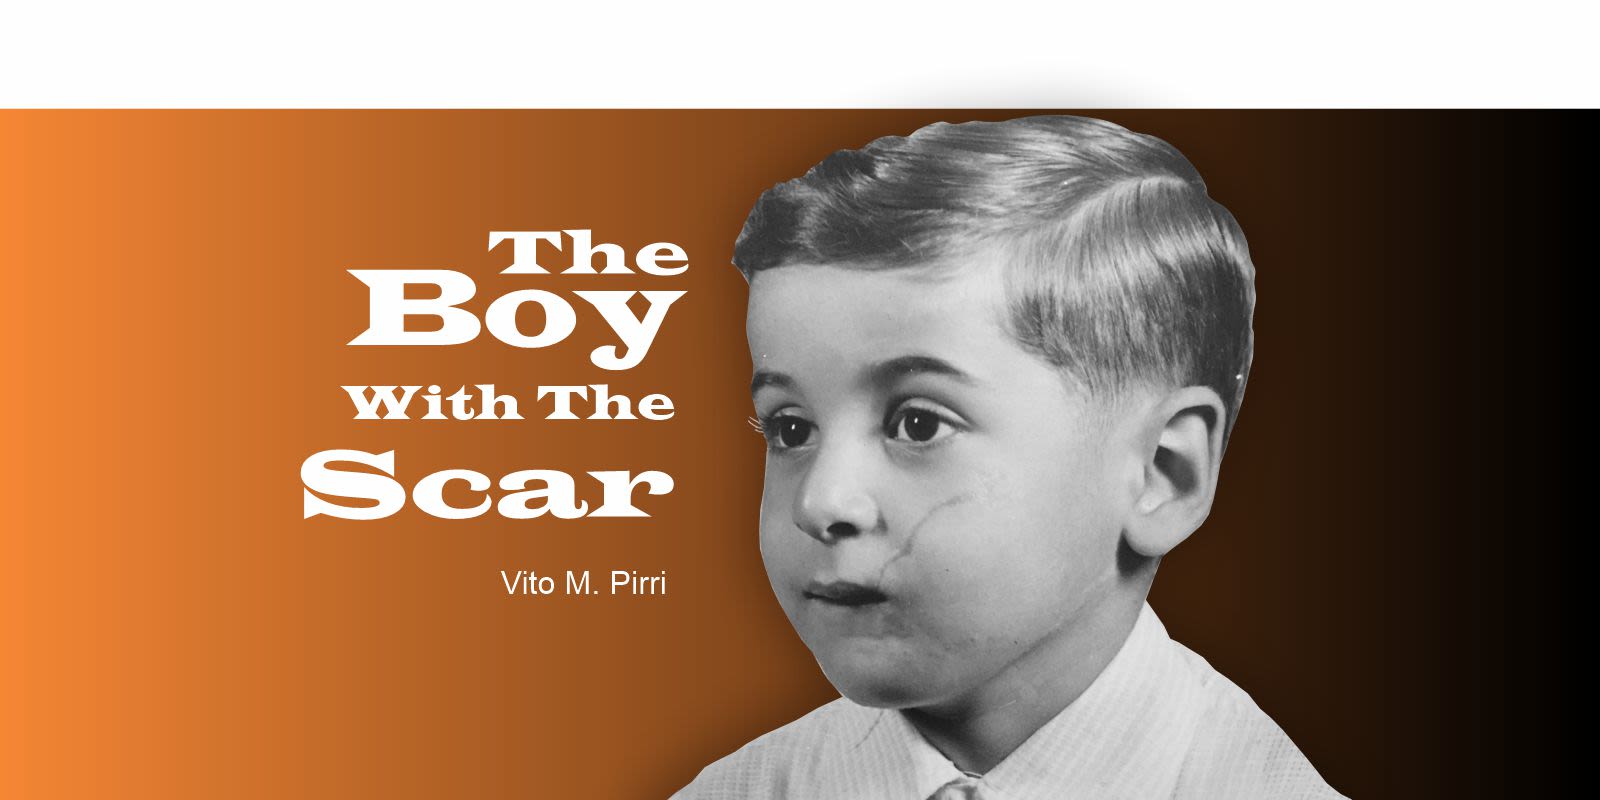 The Boy with the Scar by Vito M. Pirri